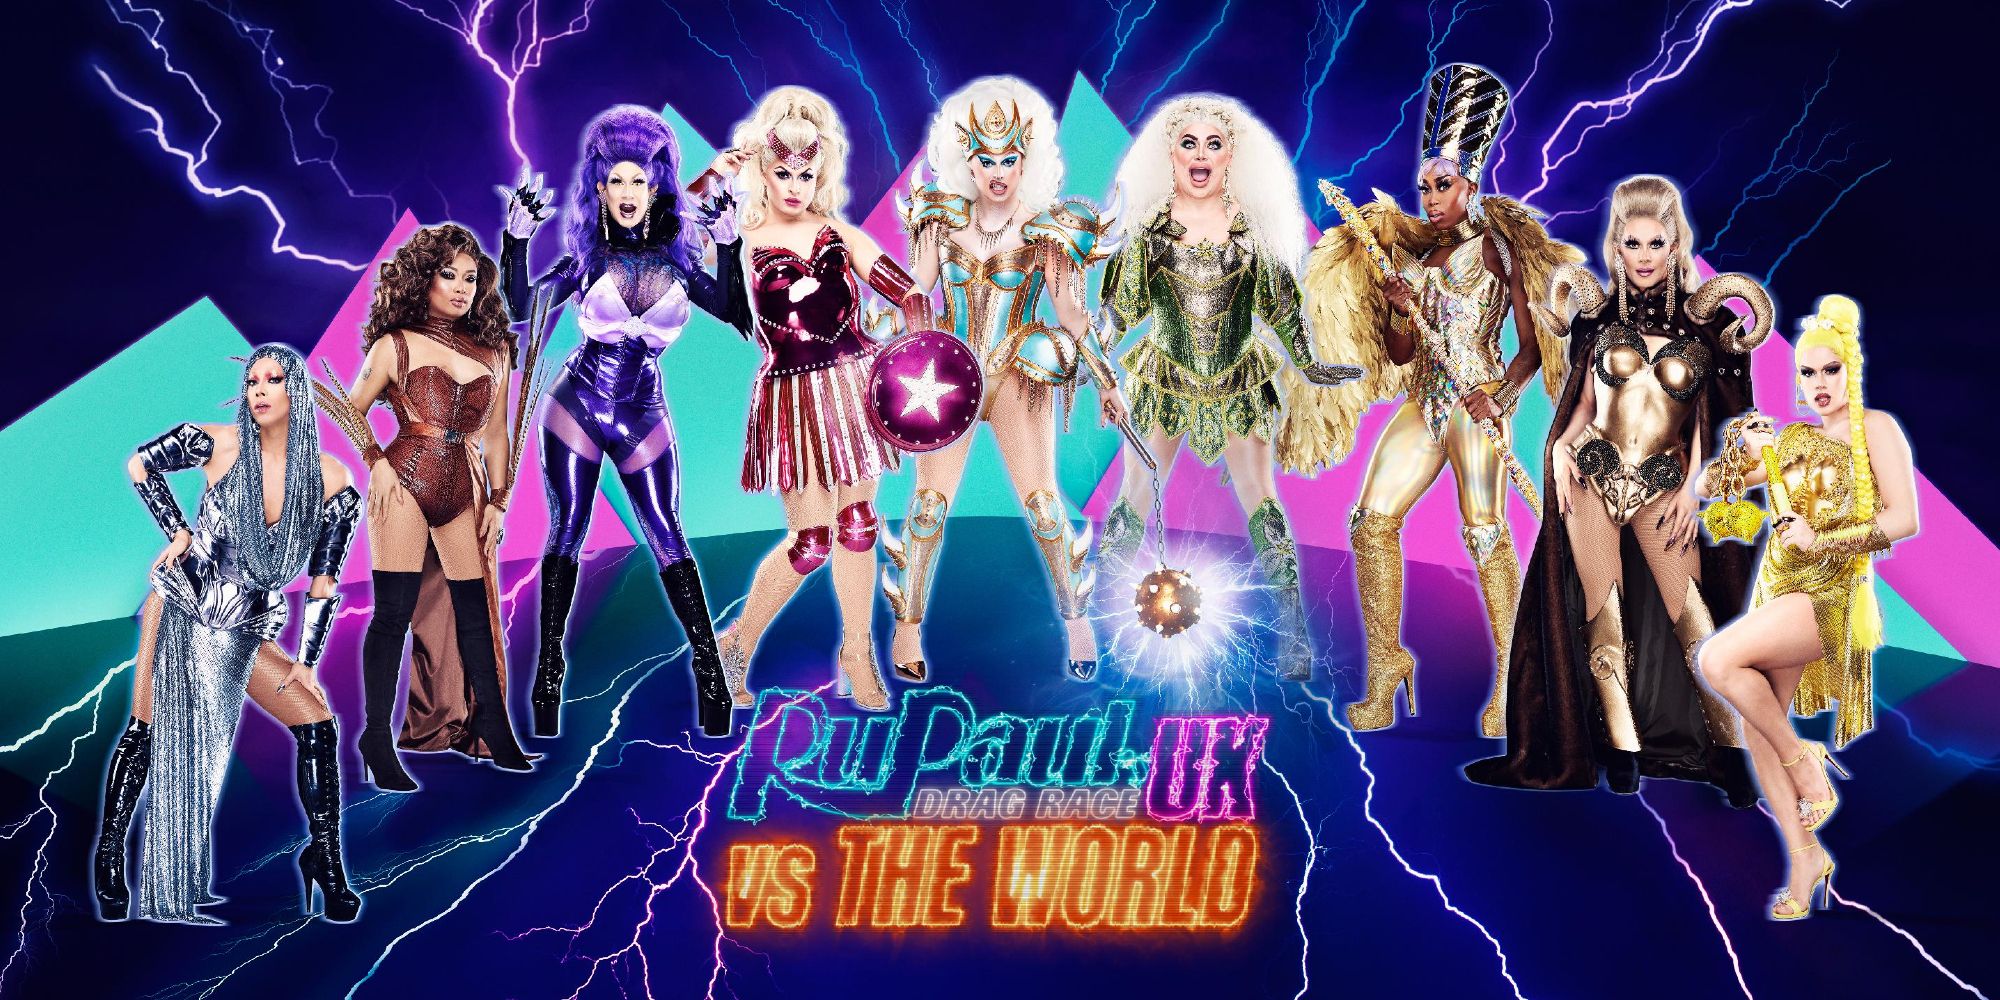 The cast of queens on RuPauls Drag Race UK vs The World